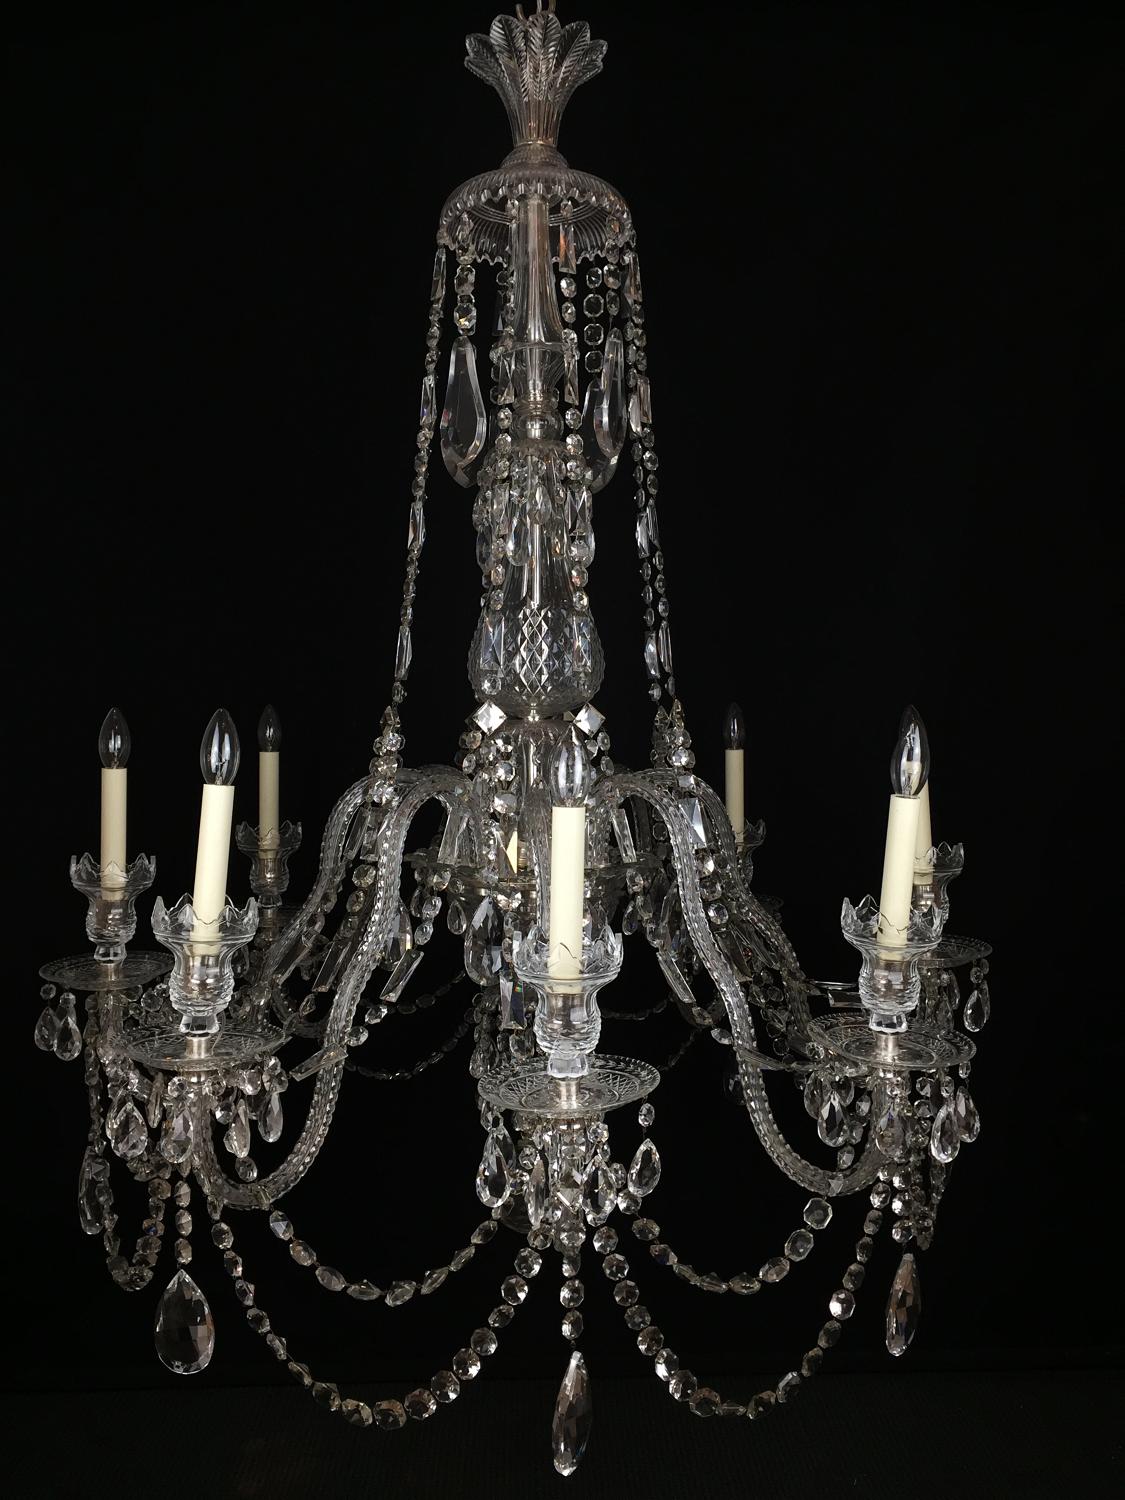 A Large Scale English Perry Cut Chandelier